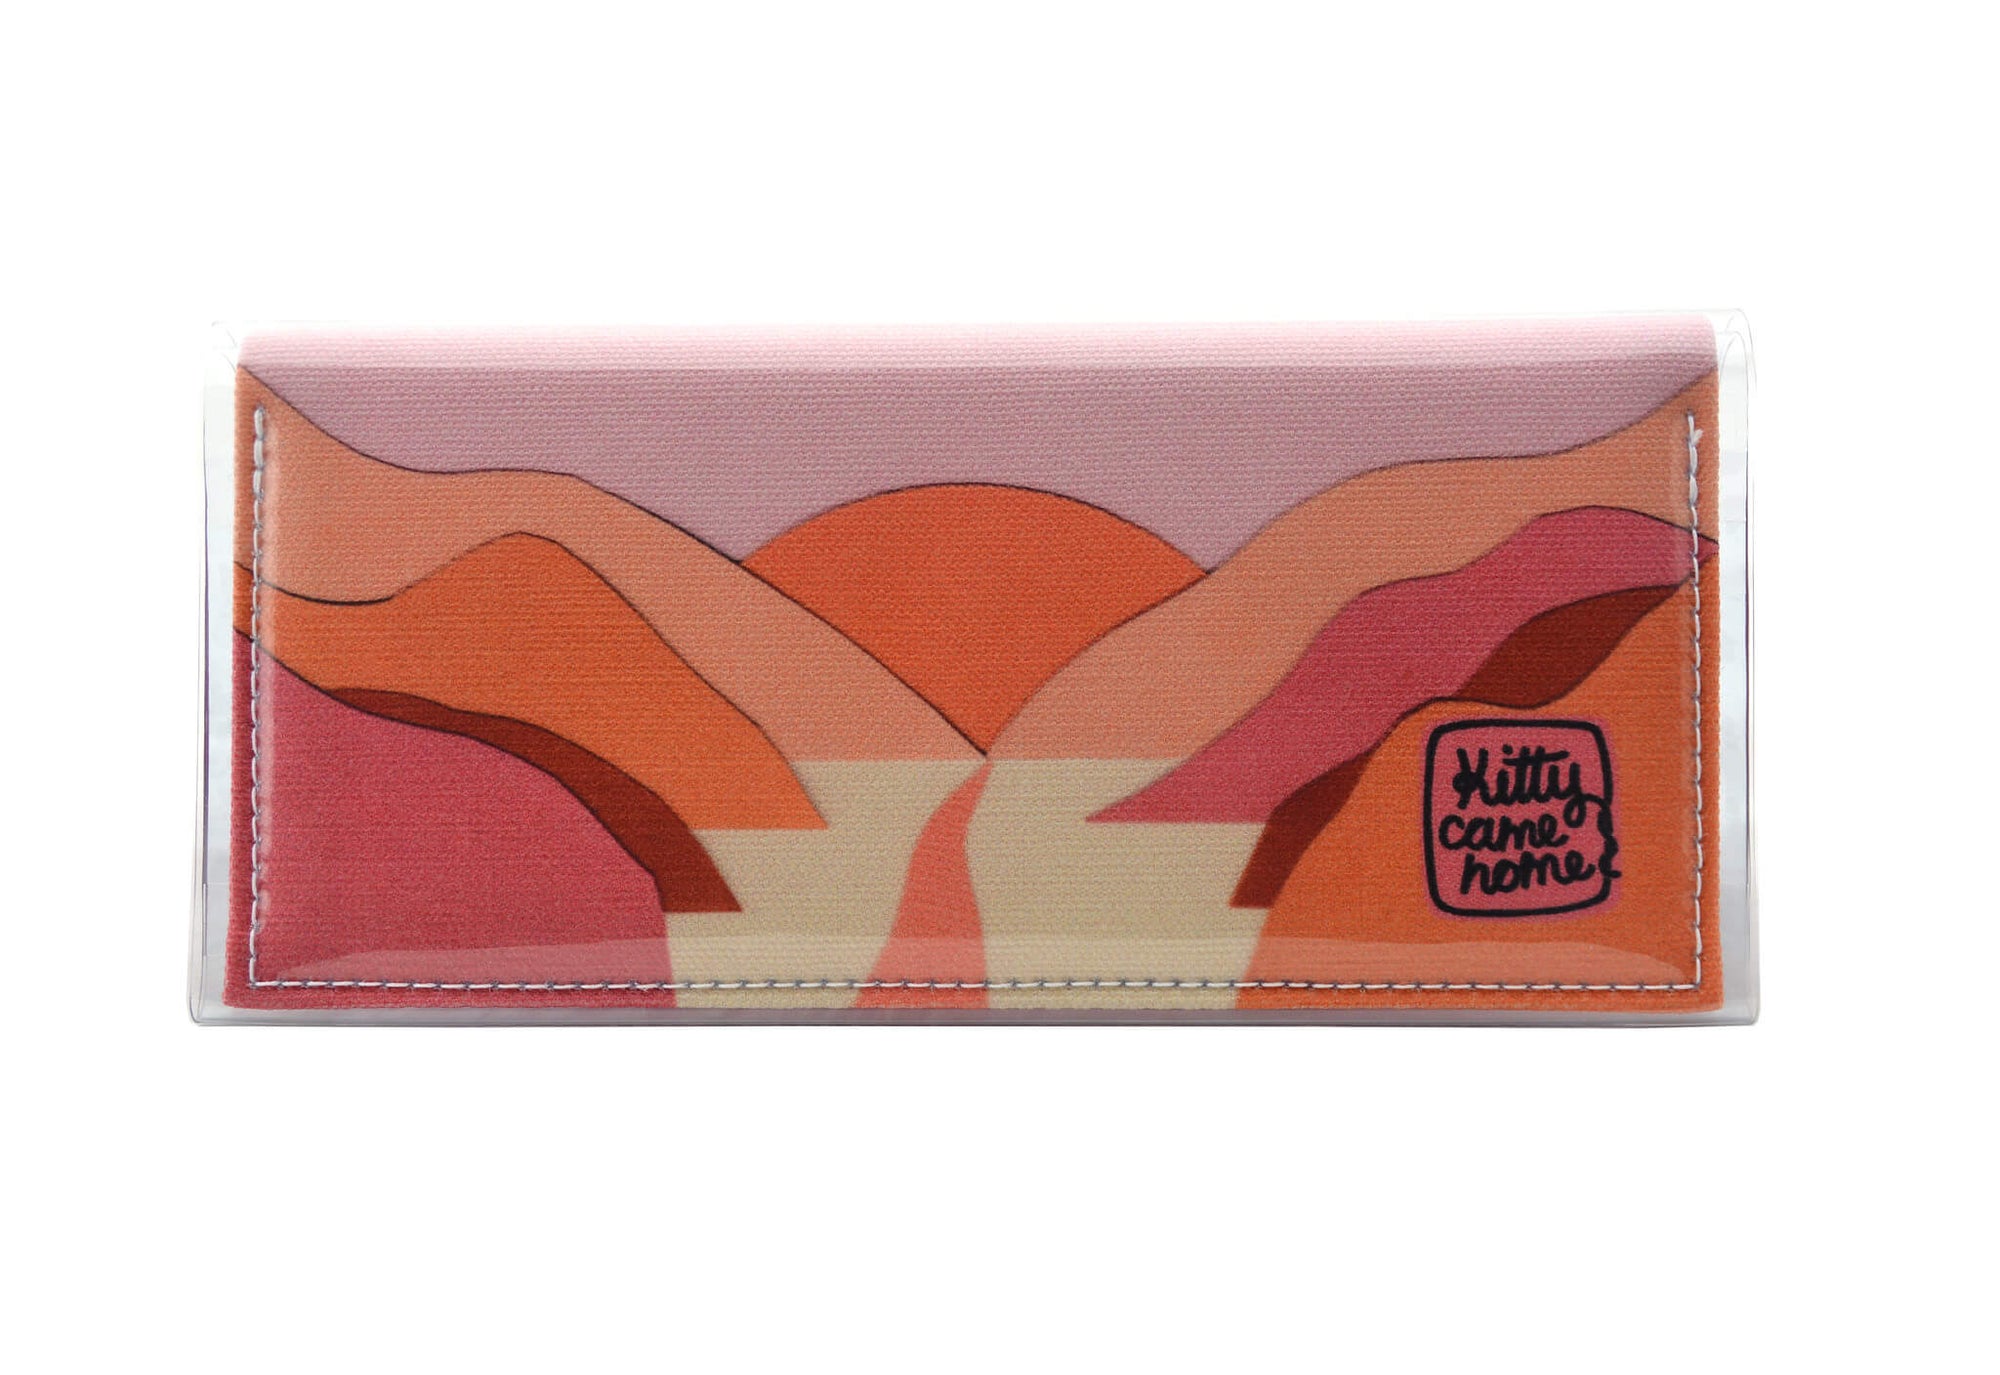 This is an image of the front of a Kitty Came Home bifold purse clutch in 'The golden dawn' design by Satin and Tat. A path wends through a valley of pink and orange hills towards an orange rising sun. This is the standard size.